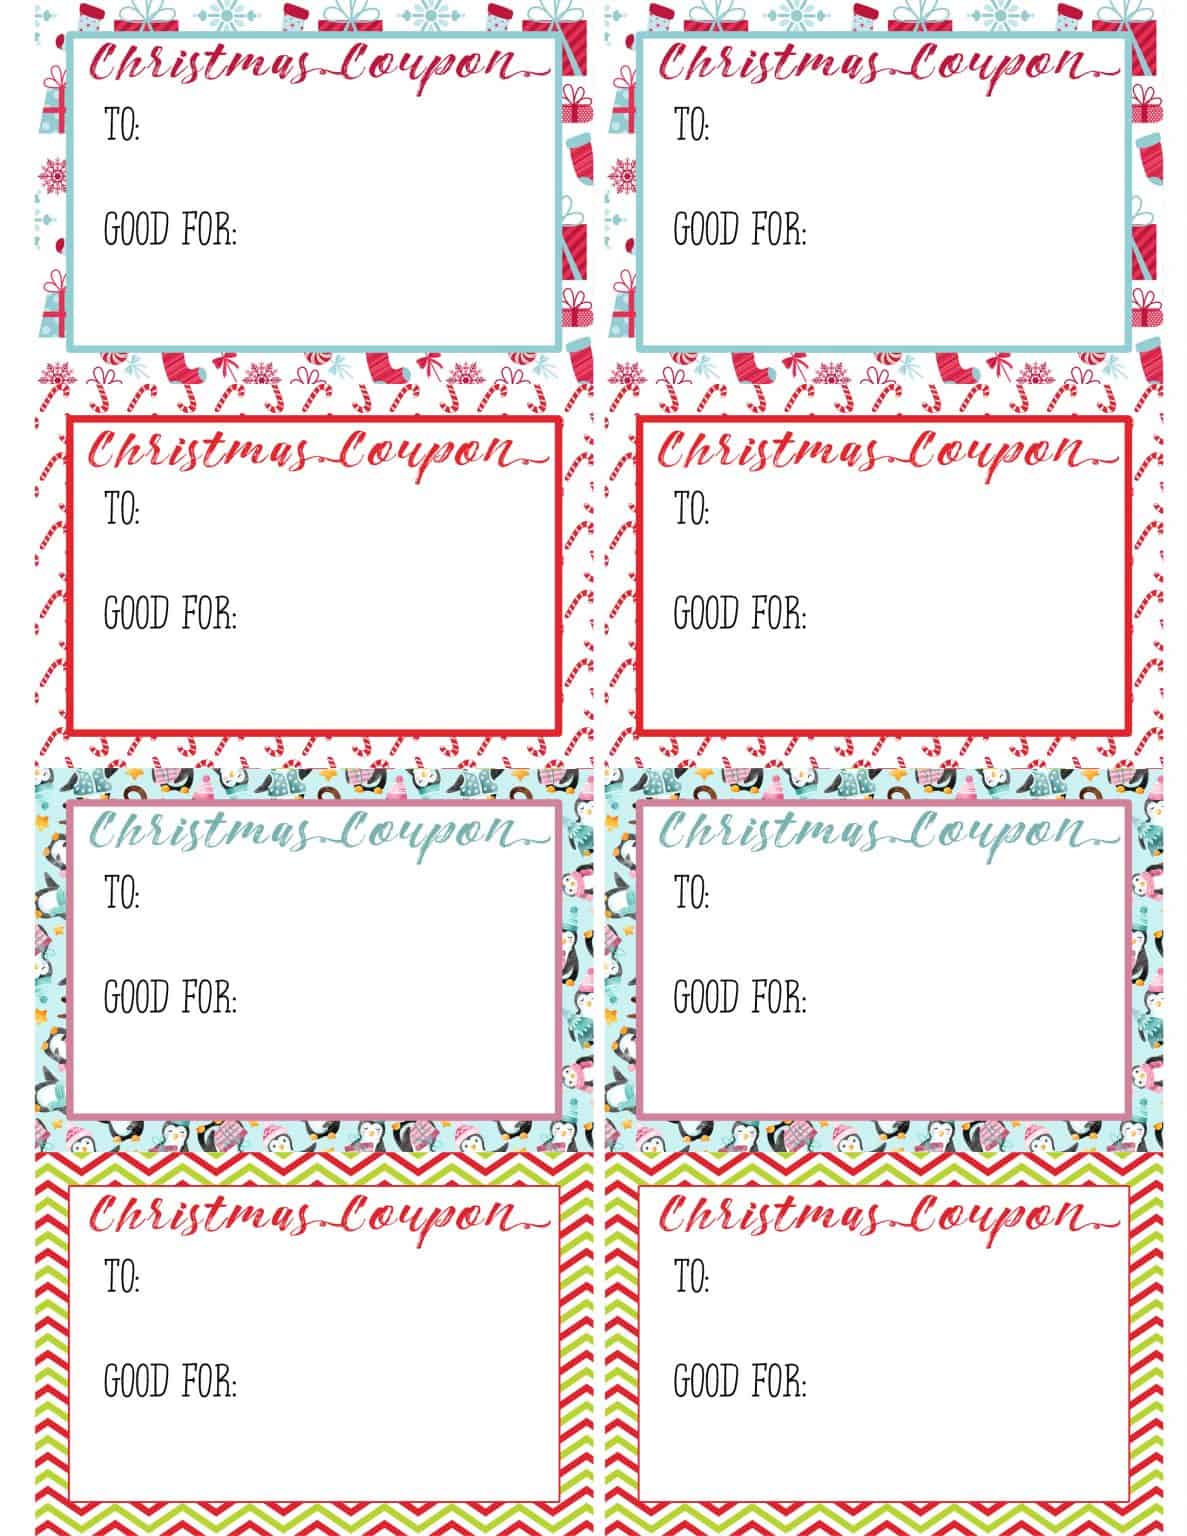 Christmas coupon printable, new in the FREE printable library